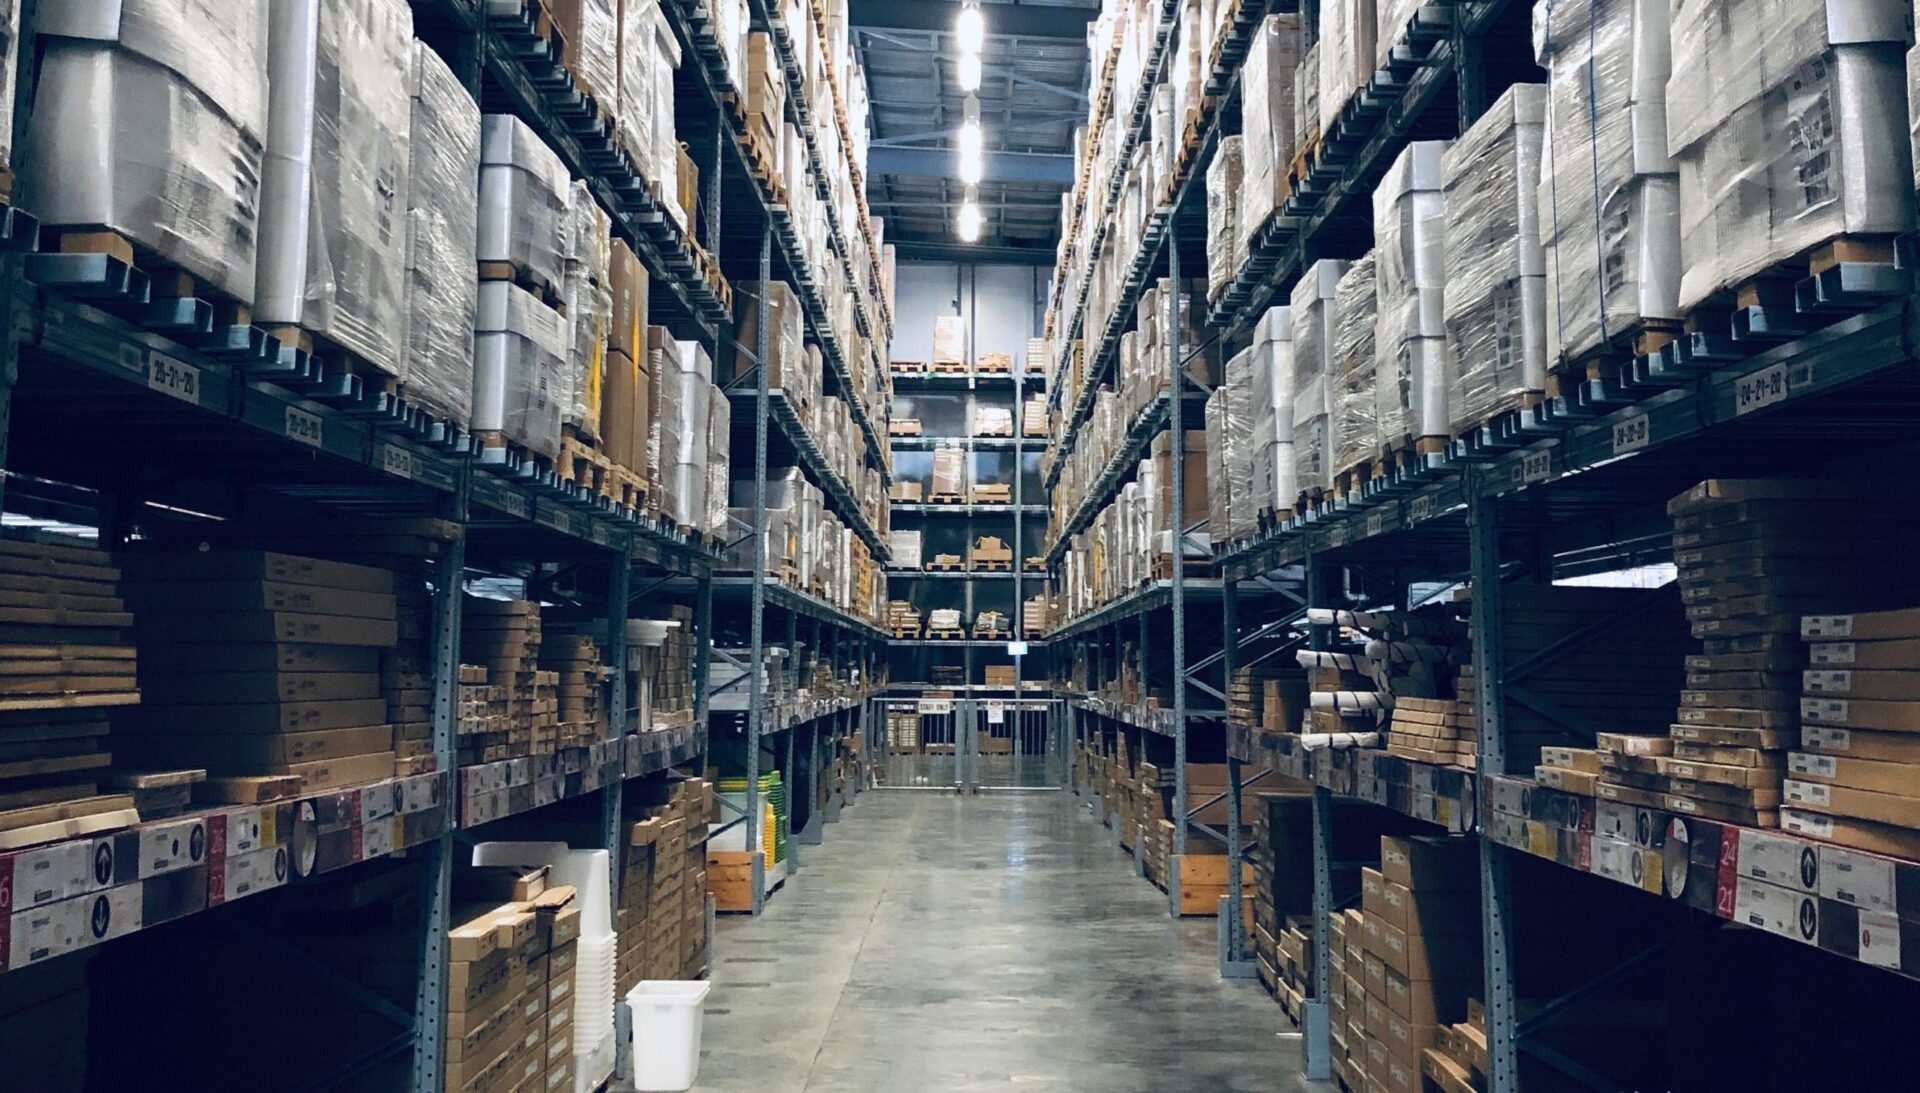 Warehouse aisle with towering shelves full of packages